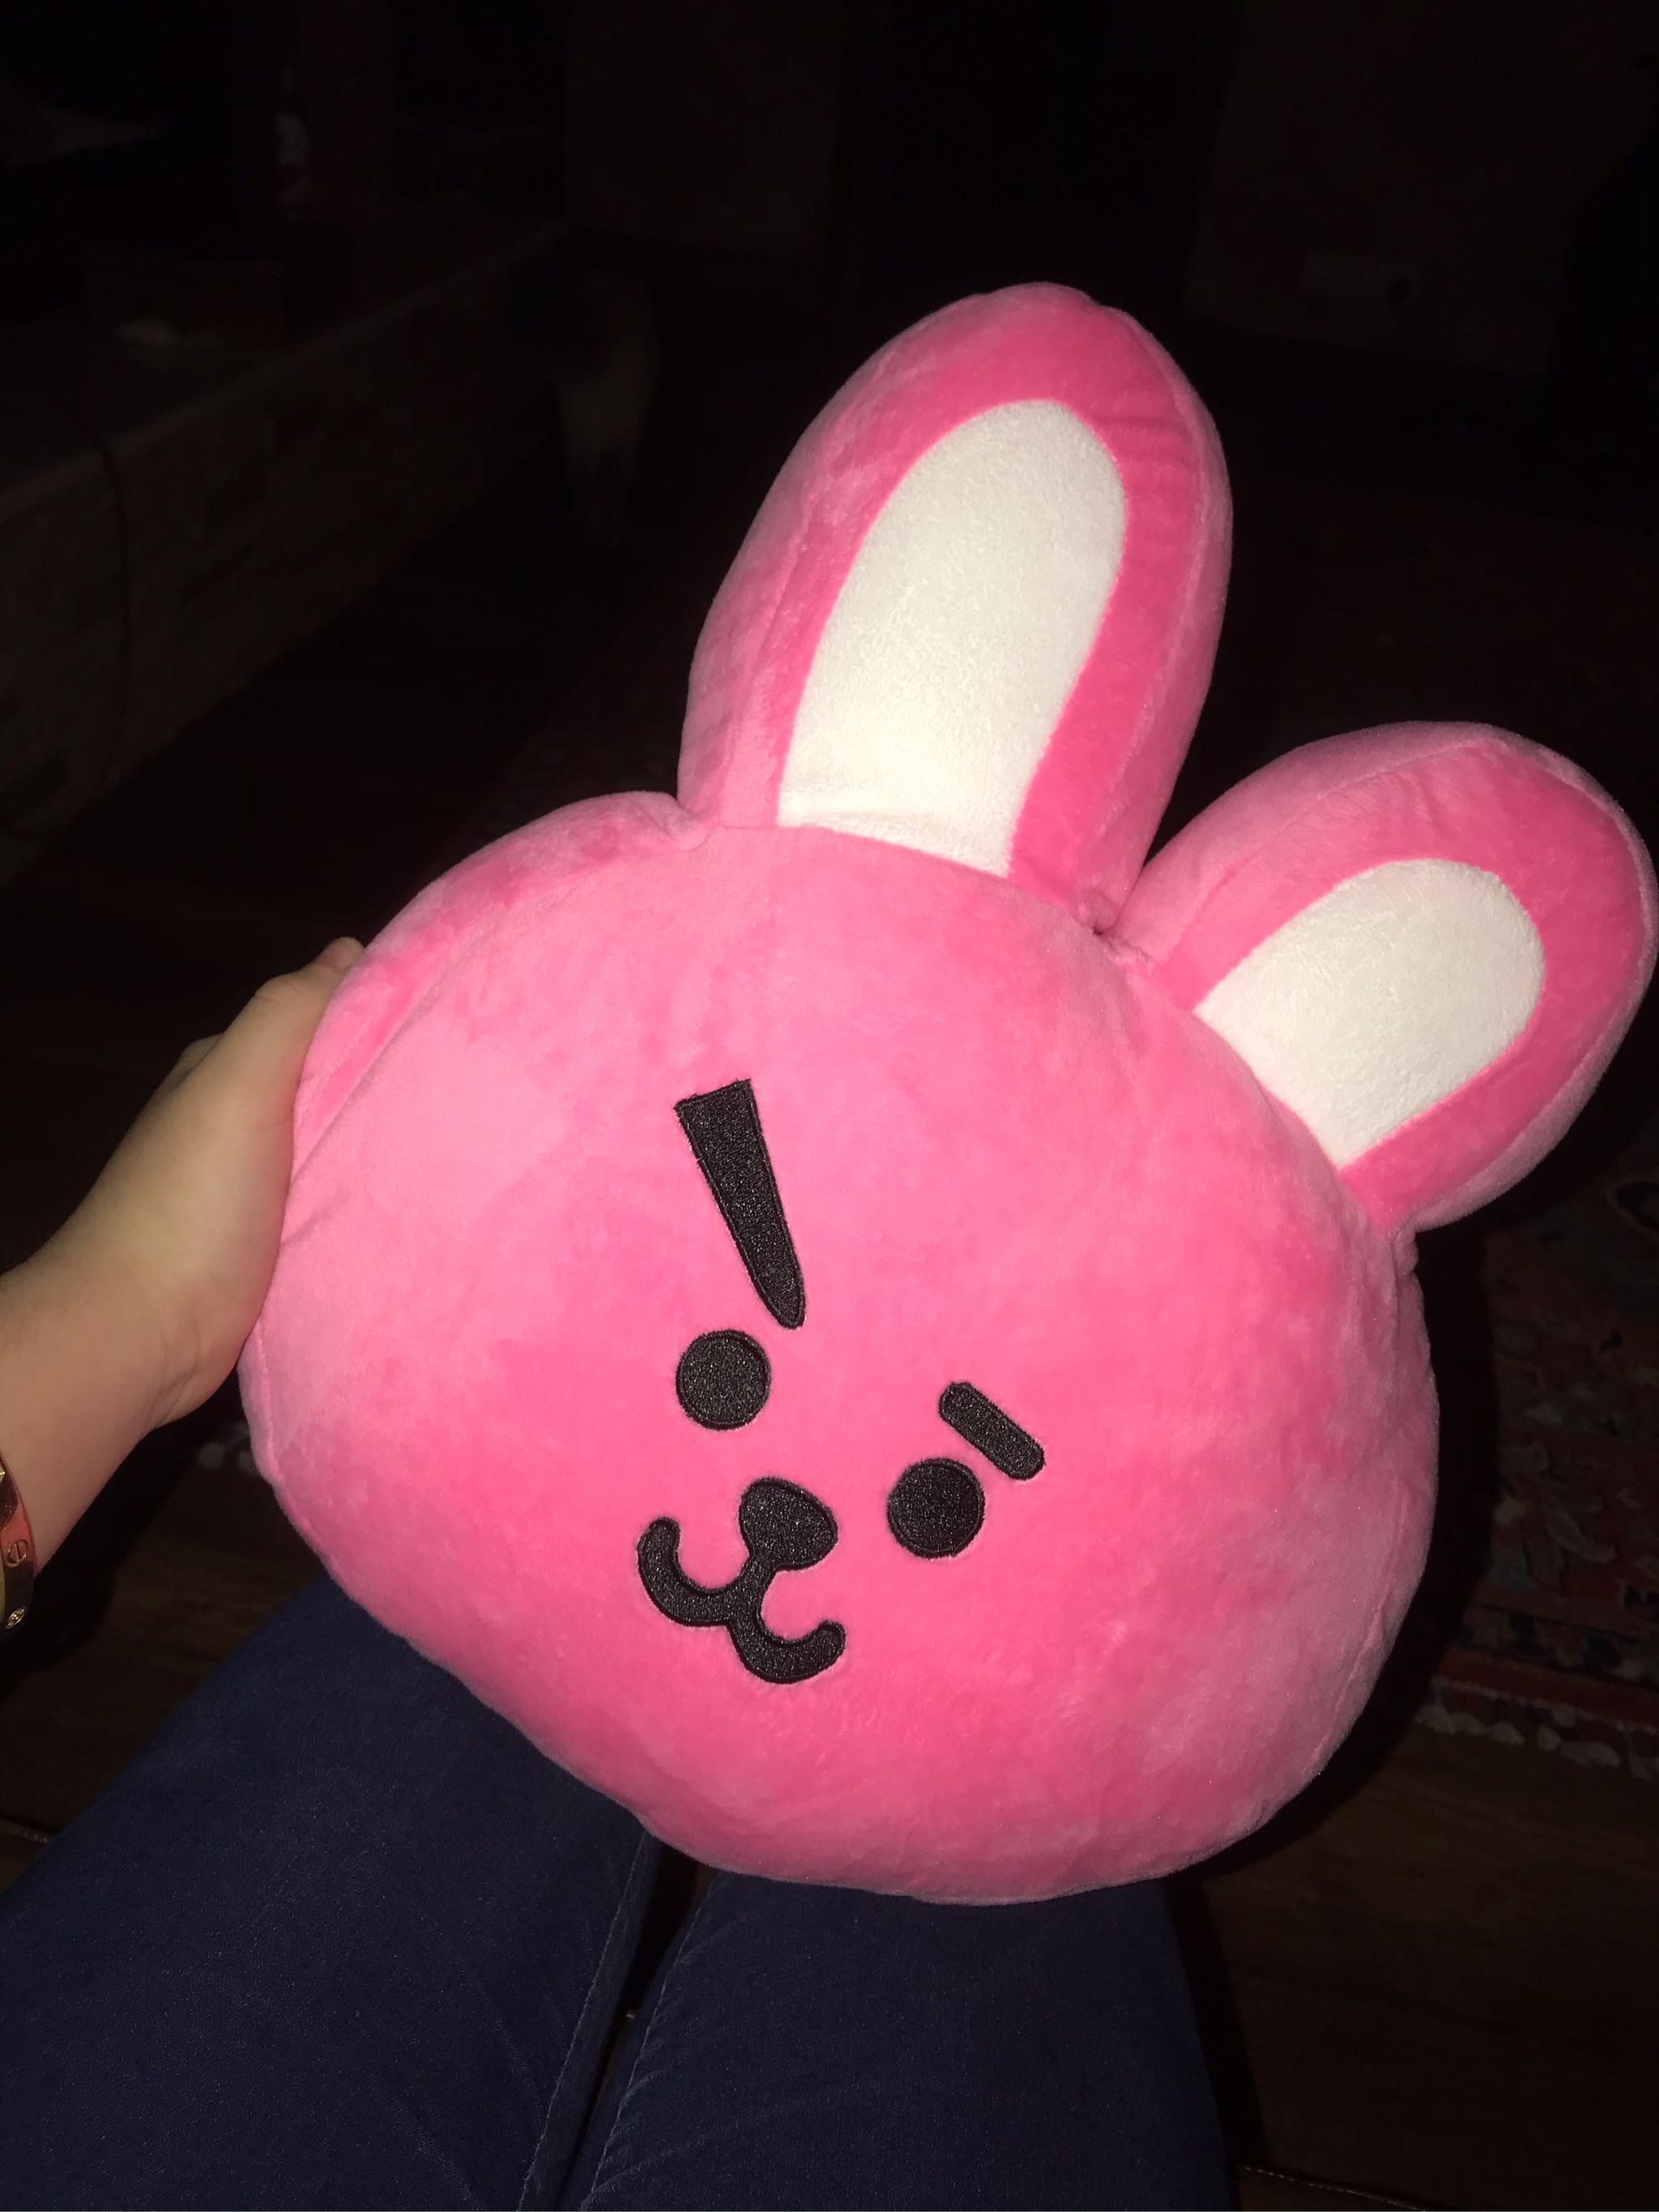  Plush Simulation Doll TATA BTS COOKY CHIMMY SHOOKY Toys Cute Bolster Pillow Dolls Gifts for Children